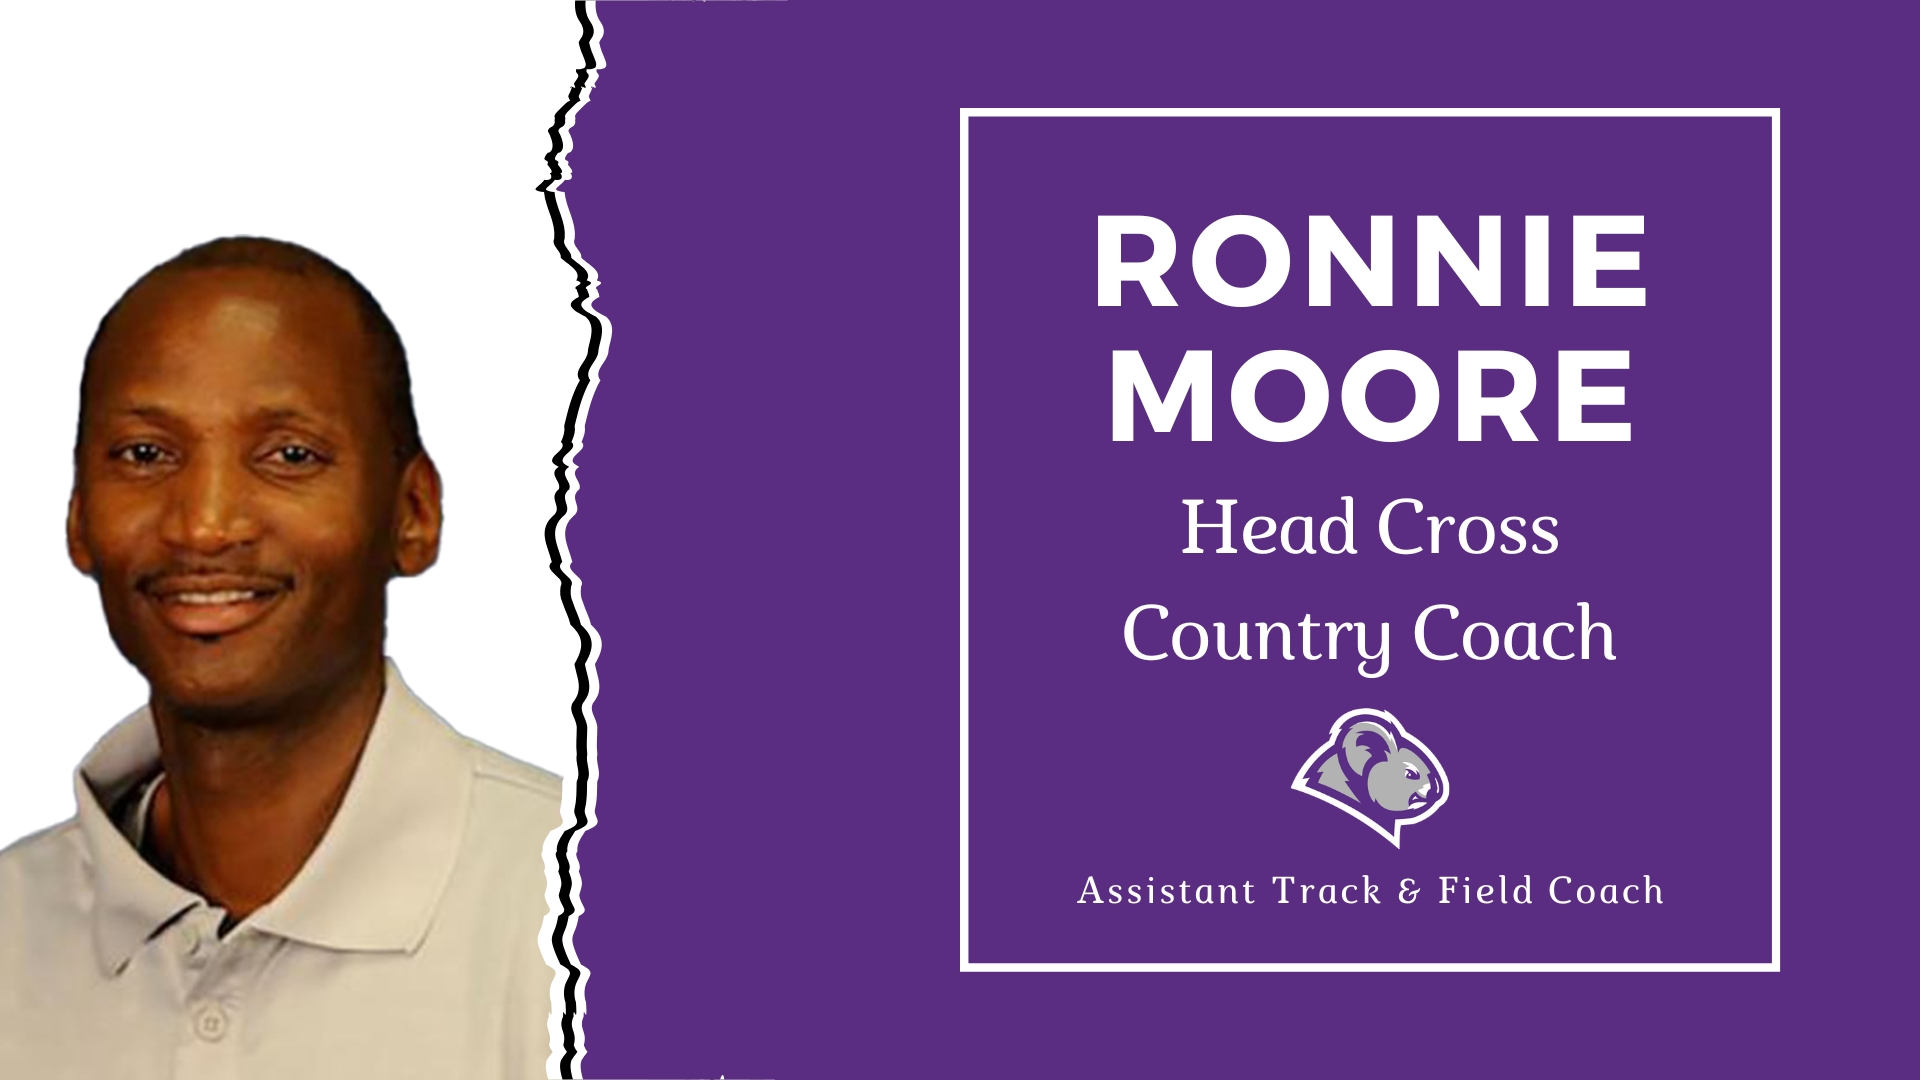 Columbia Announces Moore as Next Head Cross Country Coach